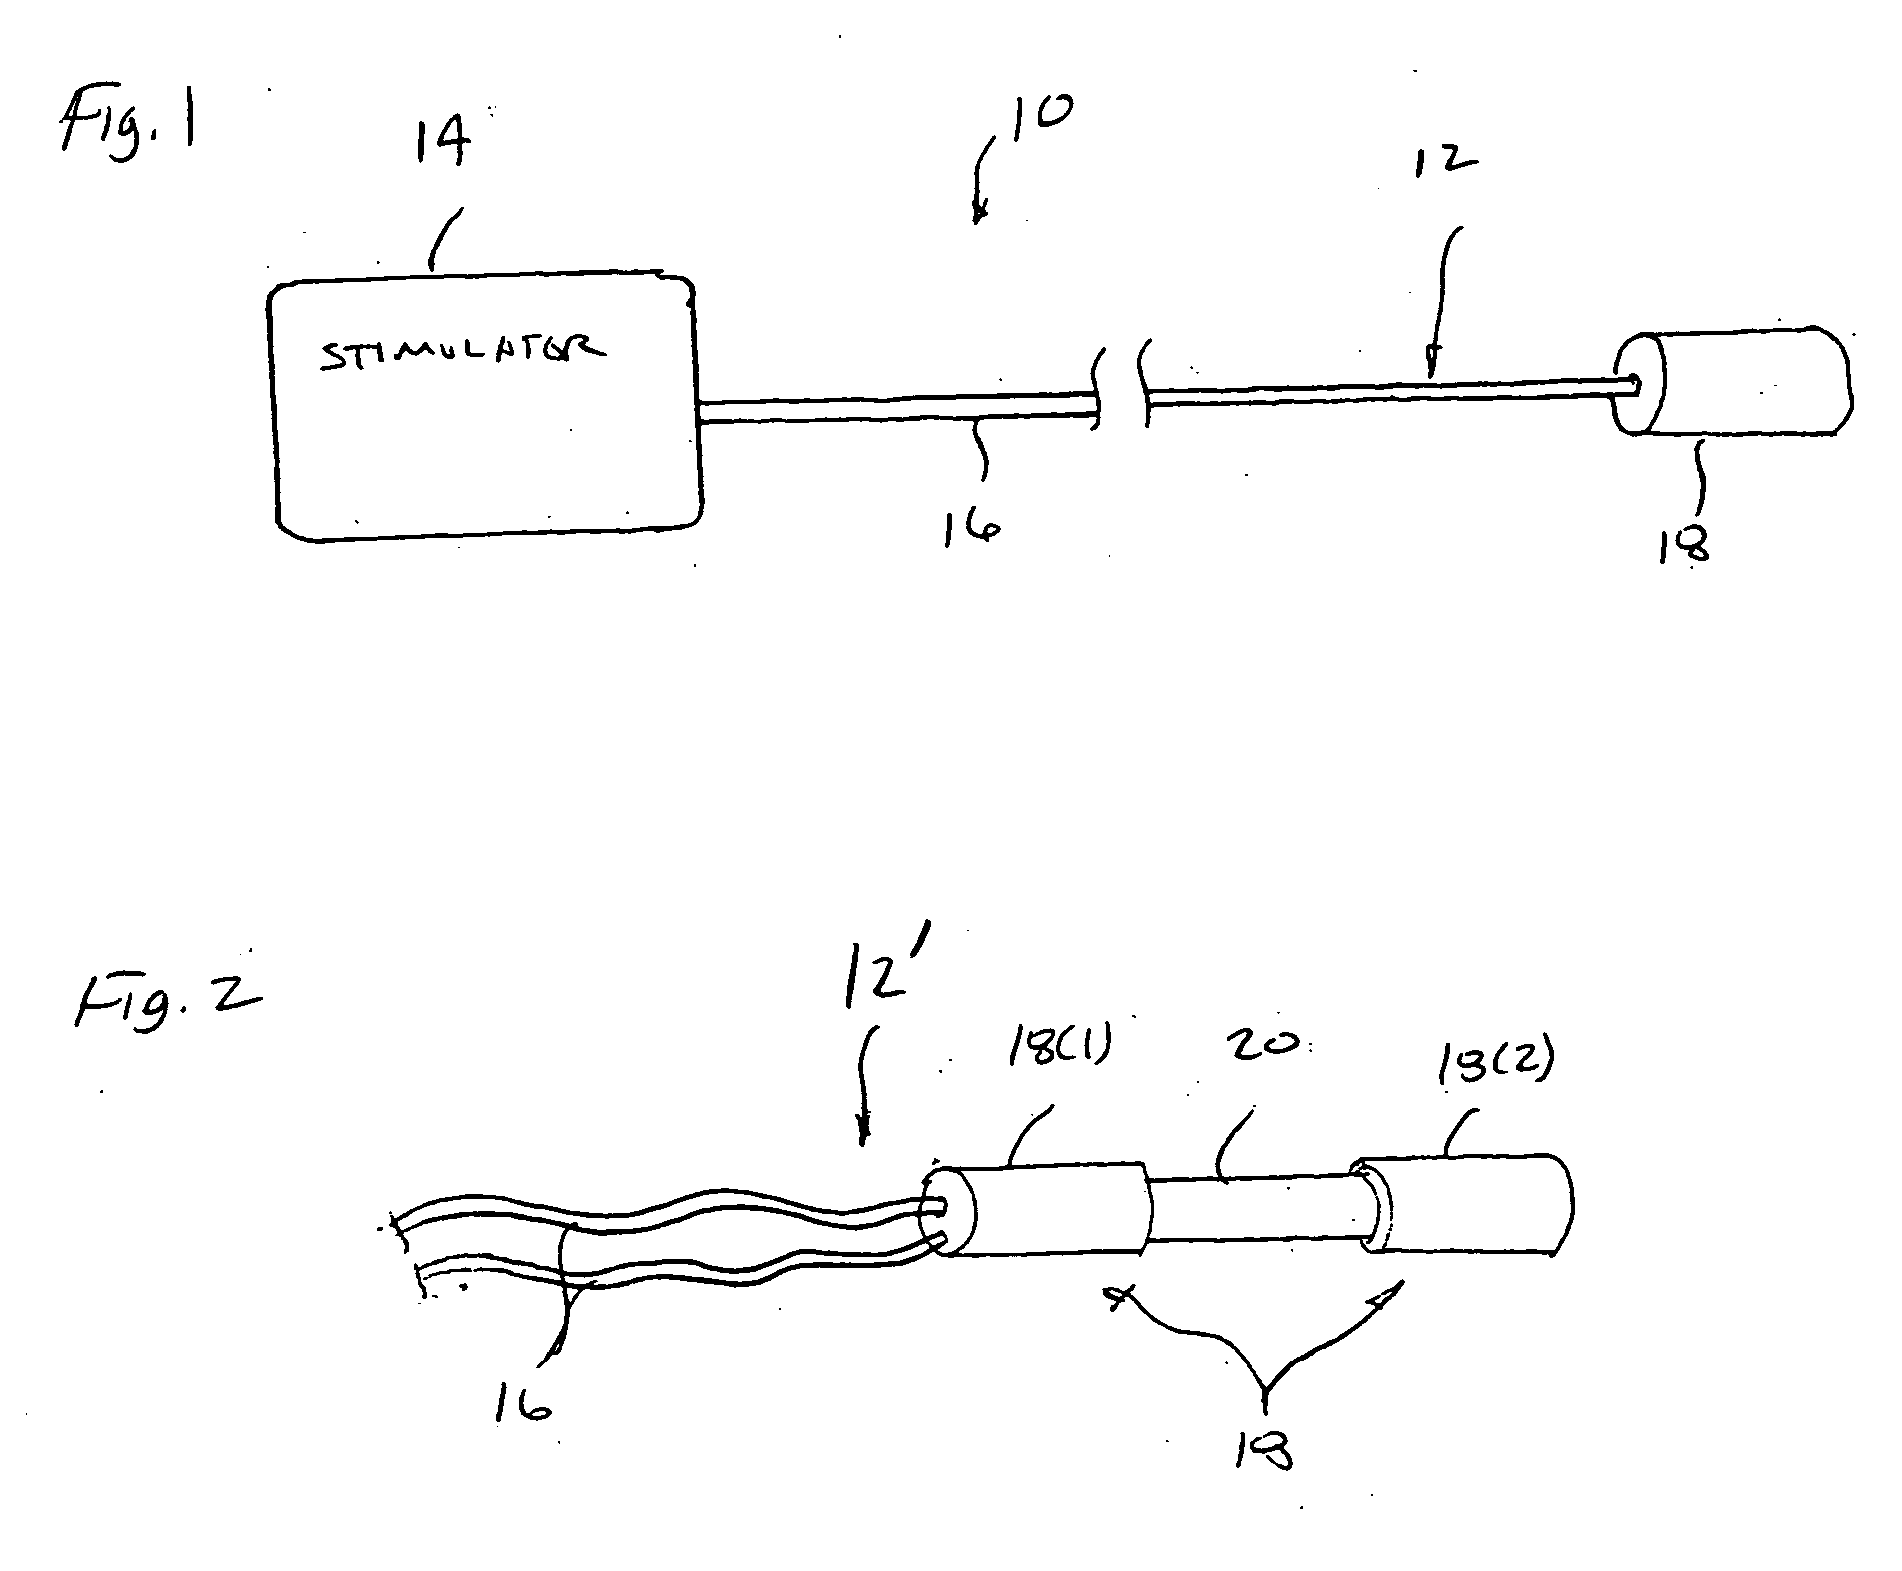 Method of intravascularly delivering stimulation leads into brain